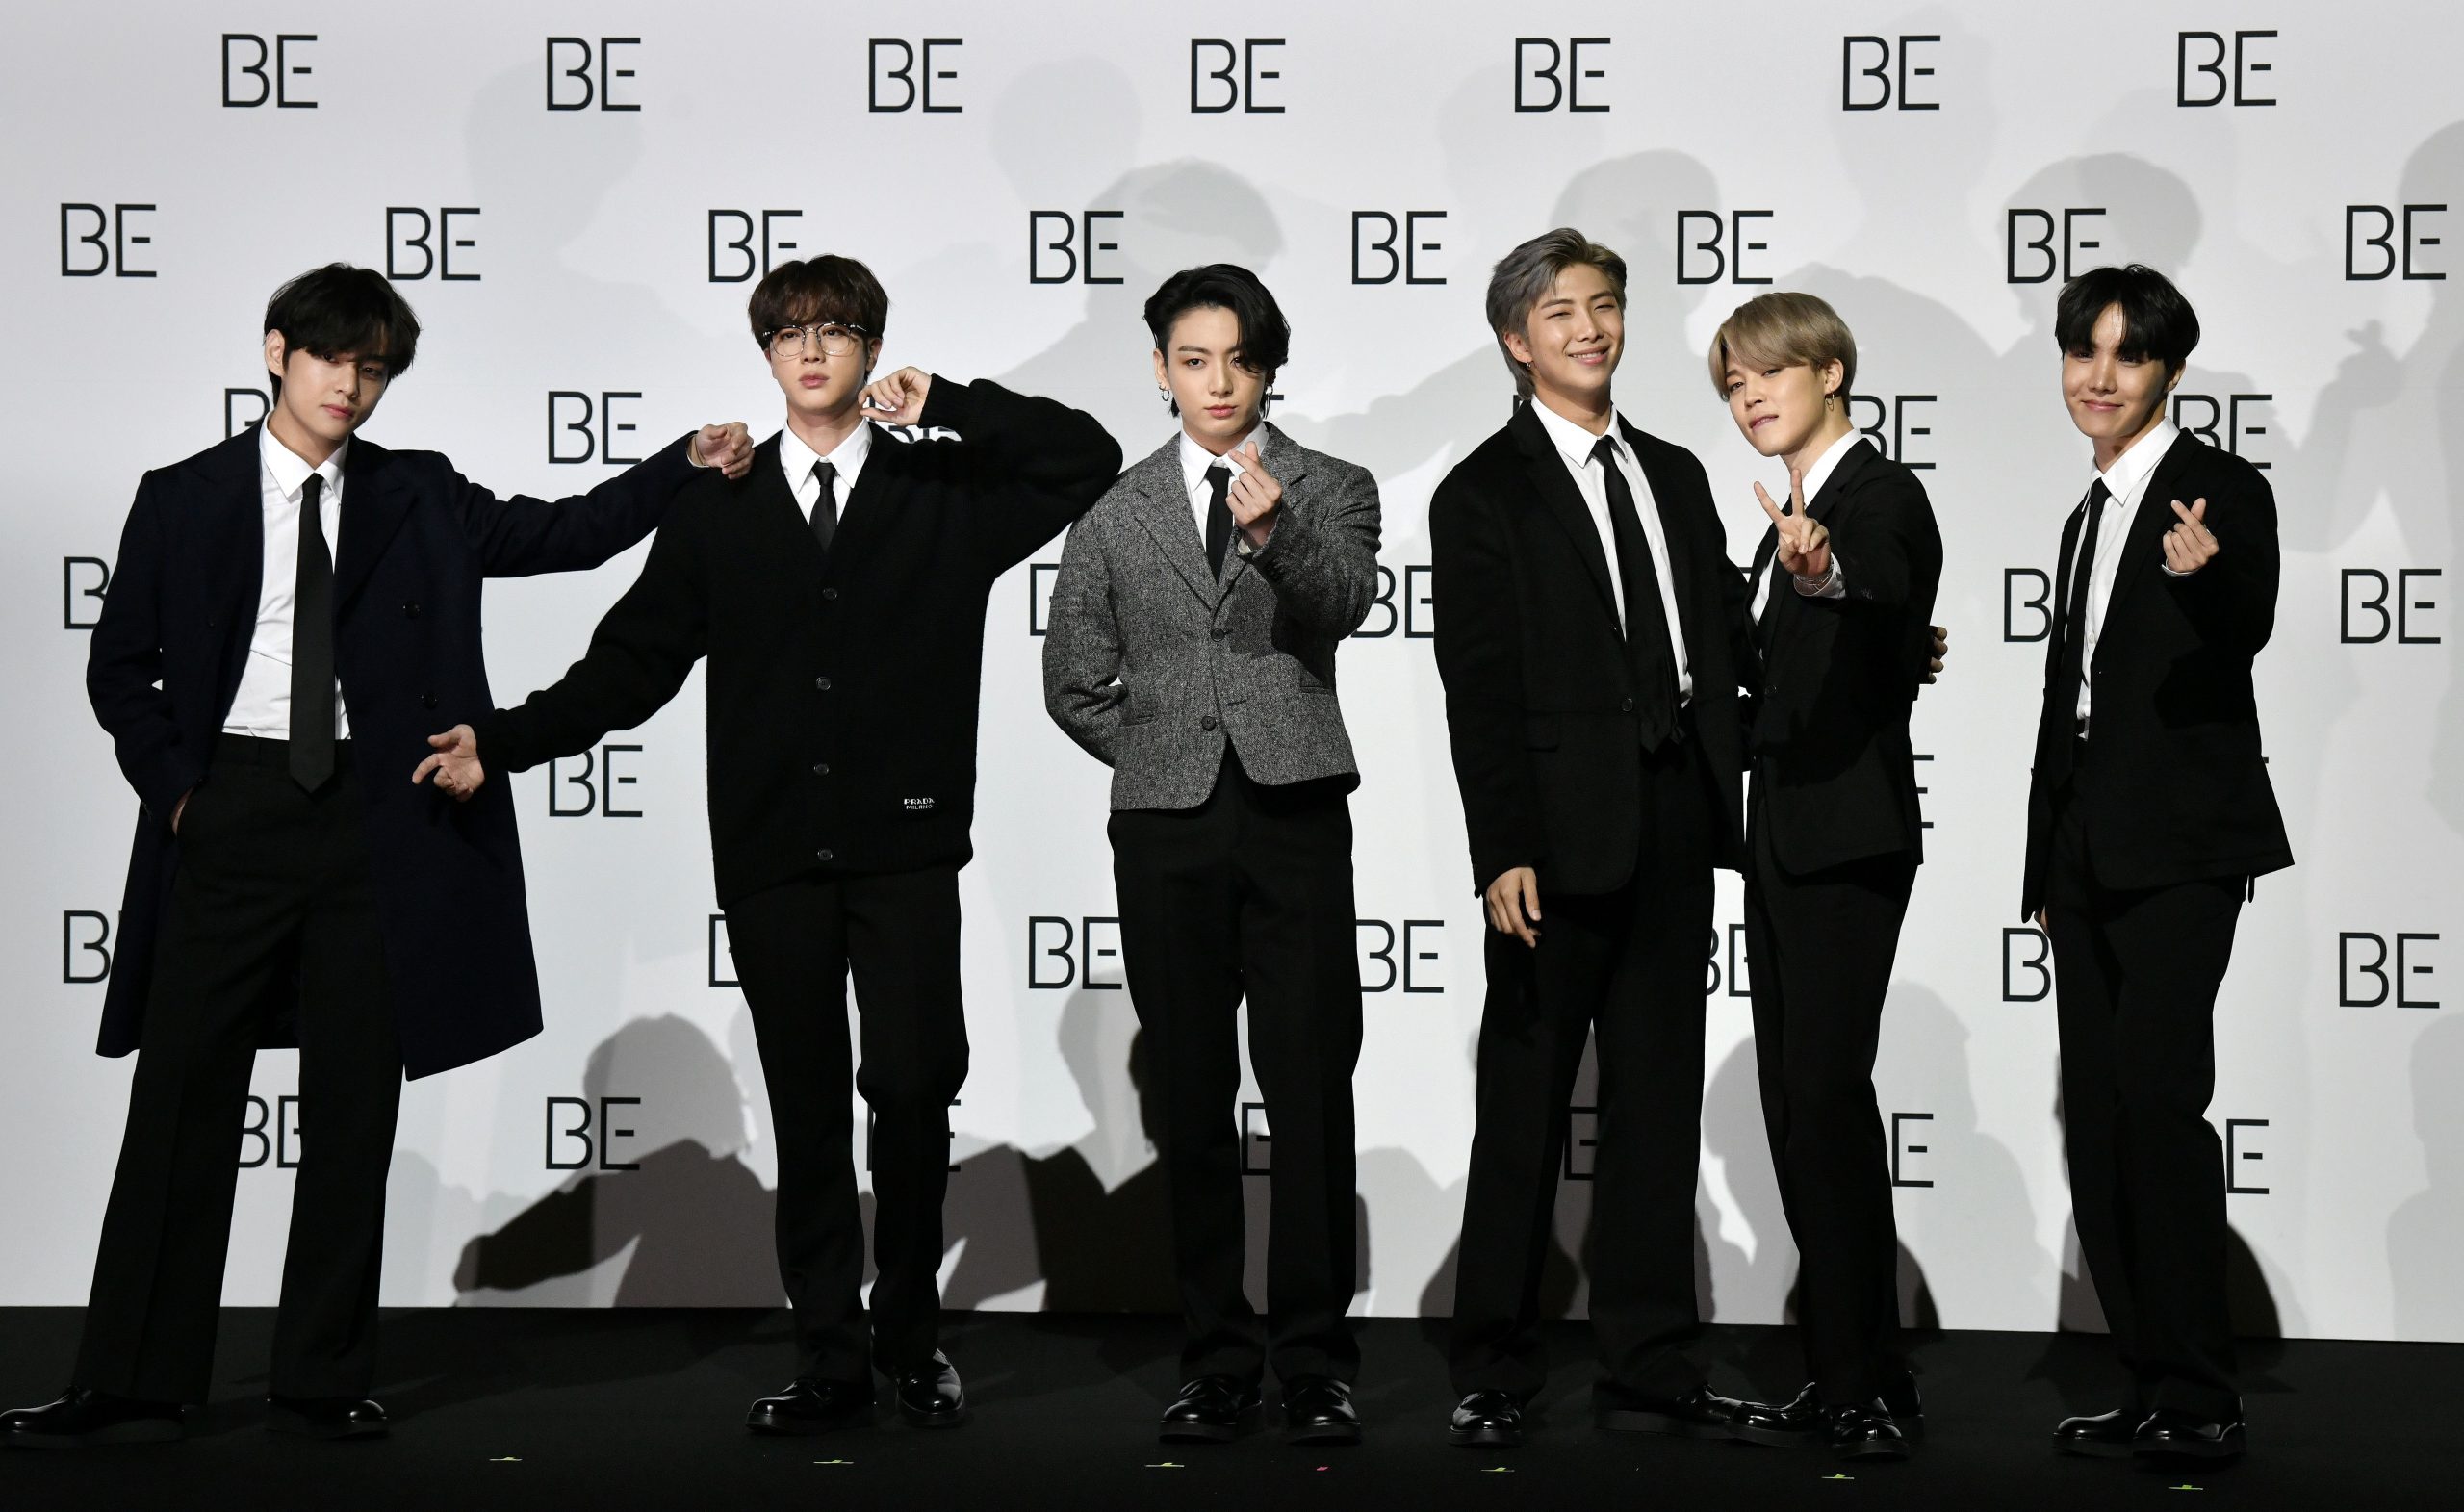 Know why BTS is set to create history at Grammy Awards 2021